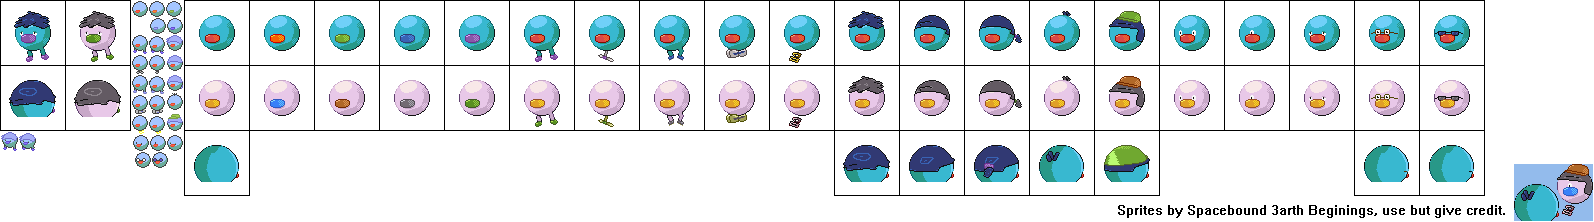 Zoombinis (Pokémon FireRed / LeafGreen-Style)